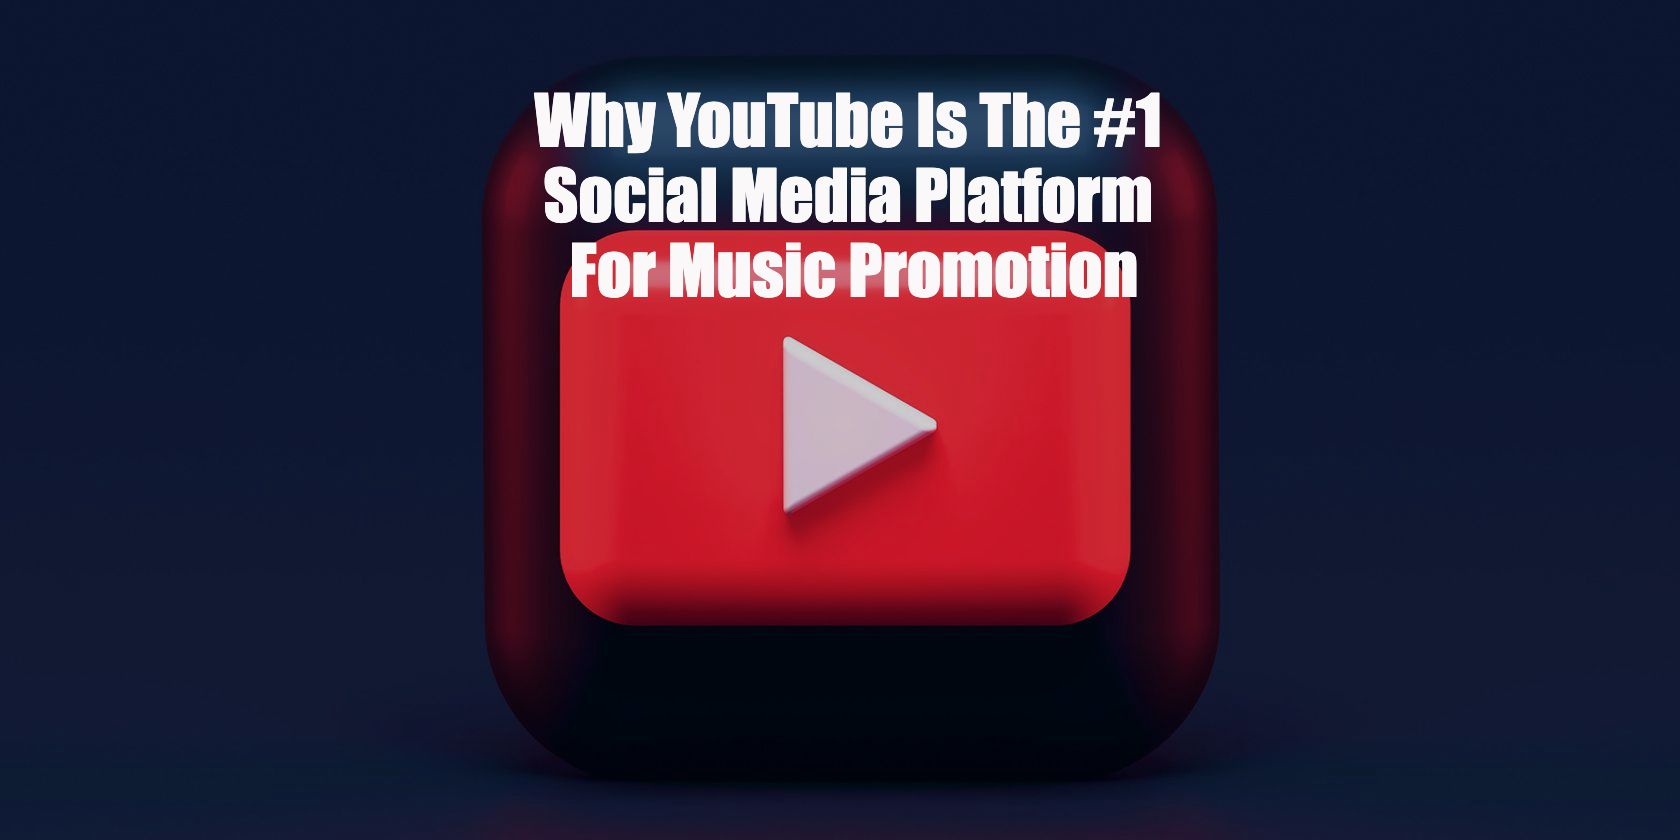 Why YouTube Is The #1 Social Media Platform For Music Promotion